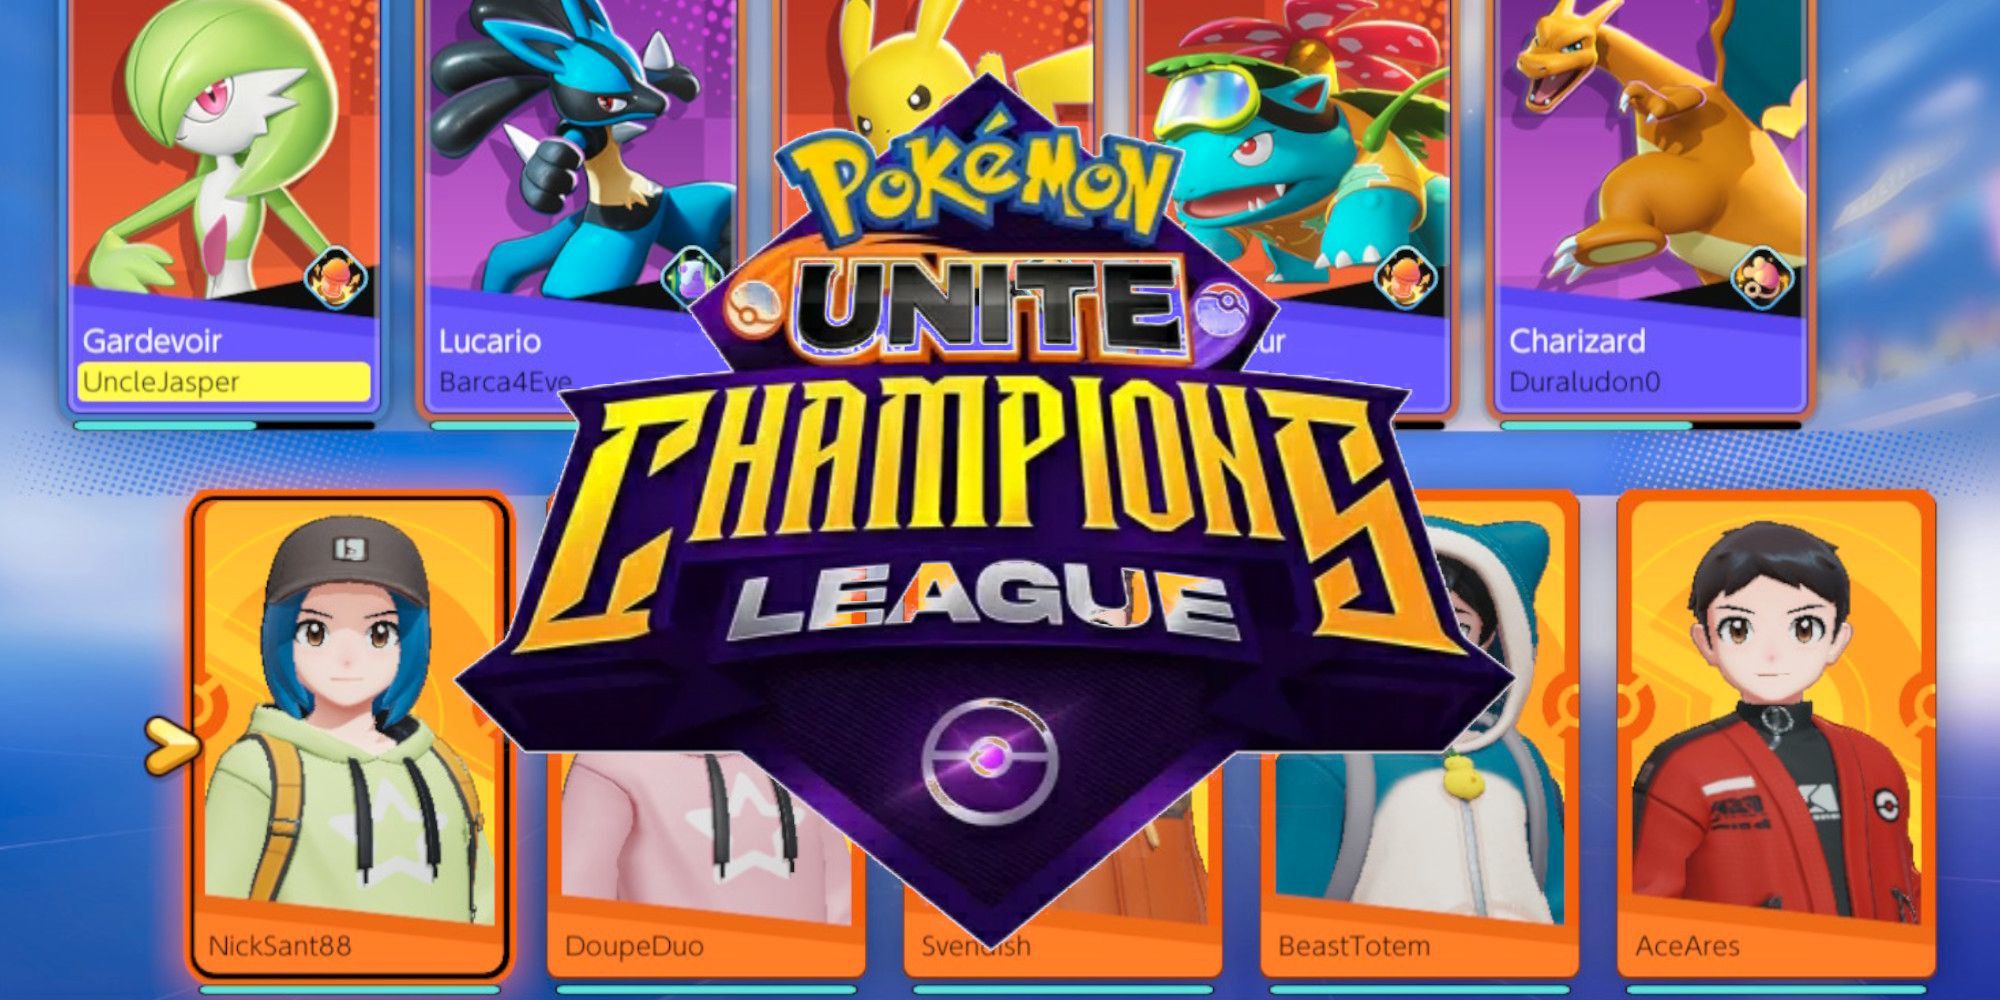 UnovaRPG - Get ready for the last - and the most important - tournament of  this month: August Pokemon Champion Tournament, we started a few hours ago  and this will last until